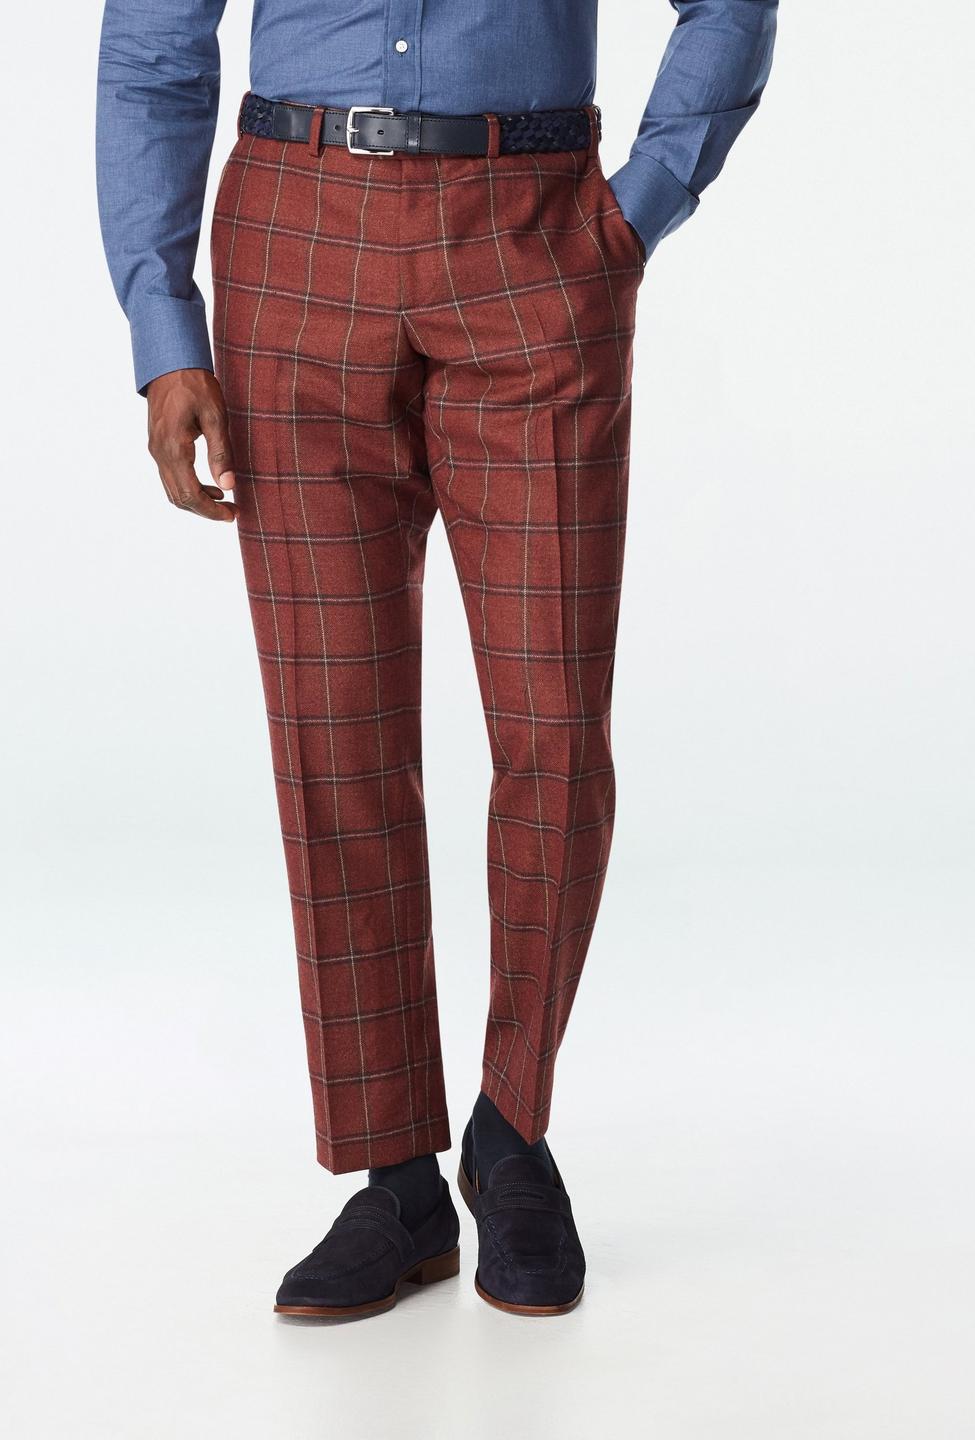 Red pants - Darley Plaid Design from Seasonal Indochino Collection